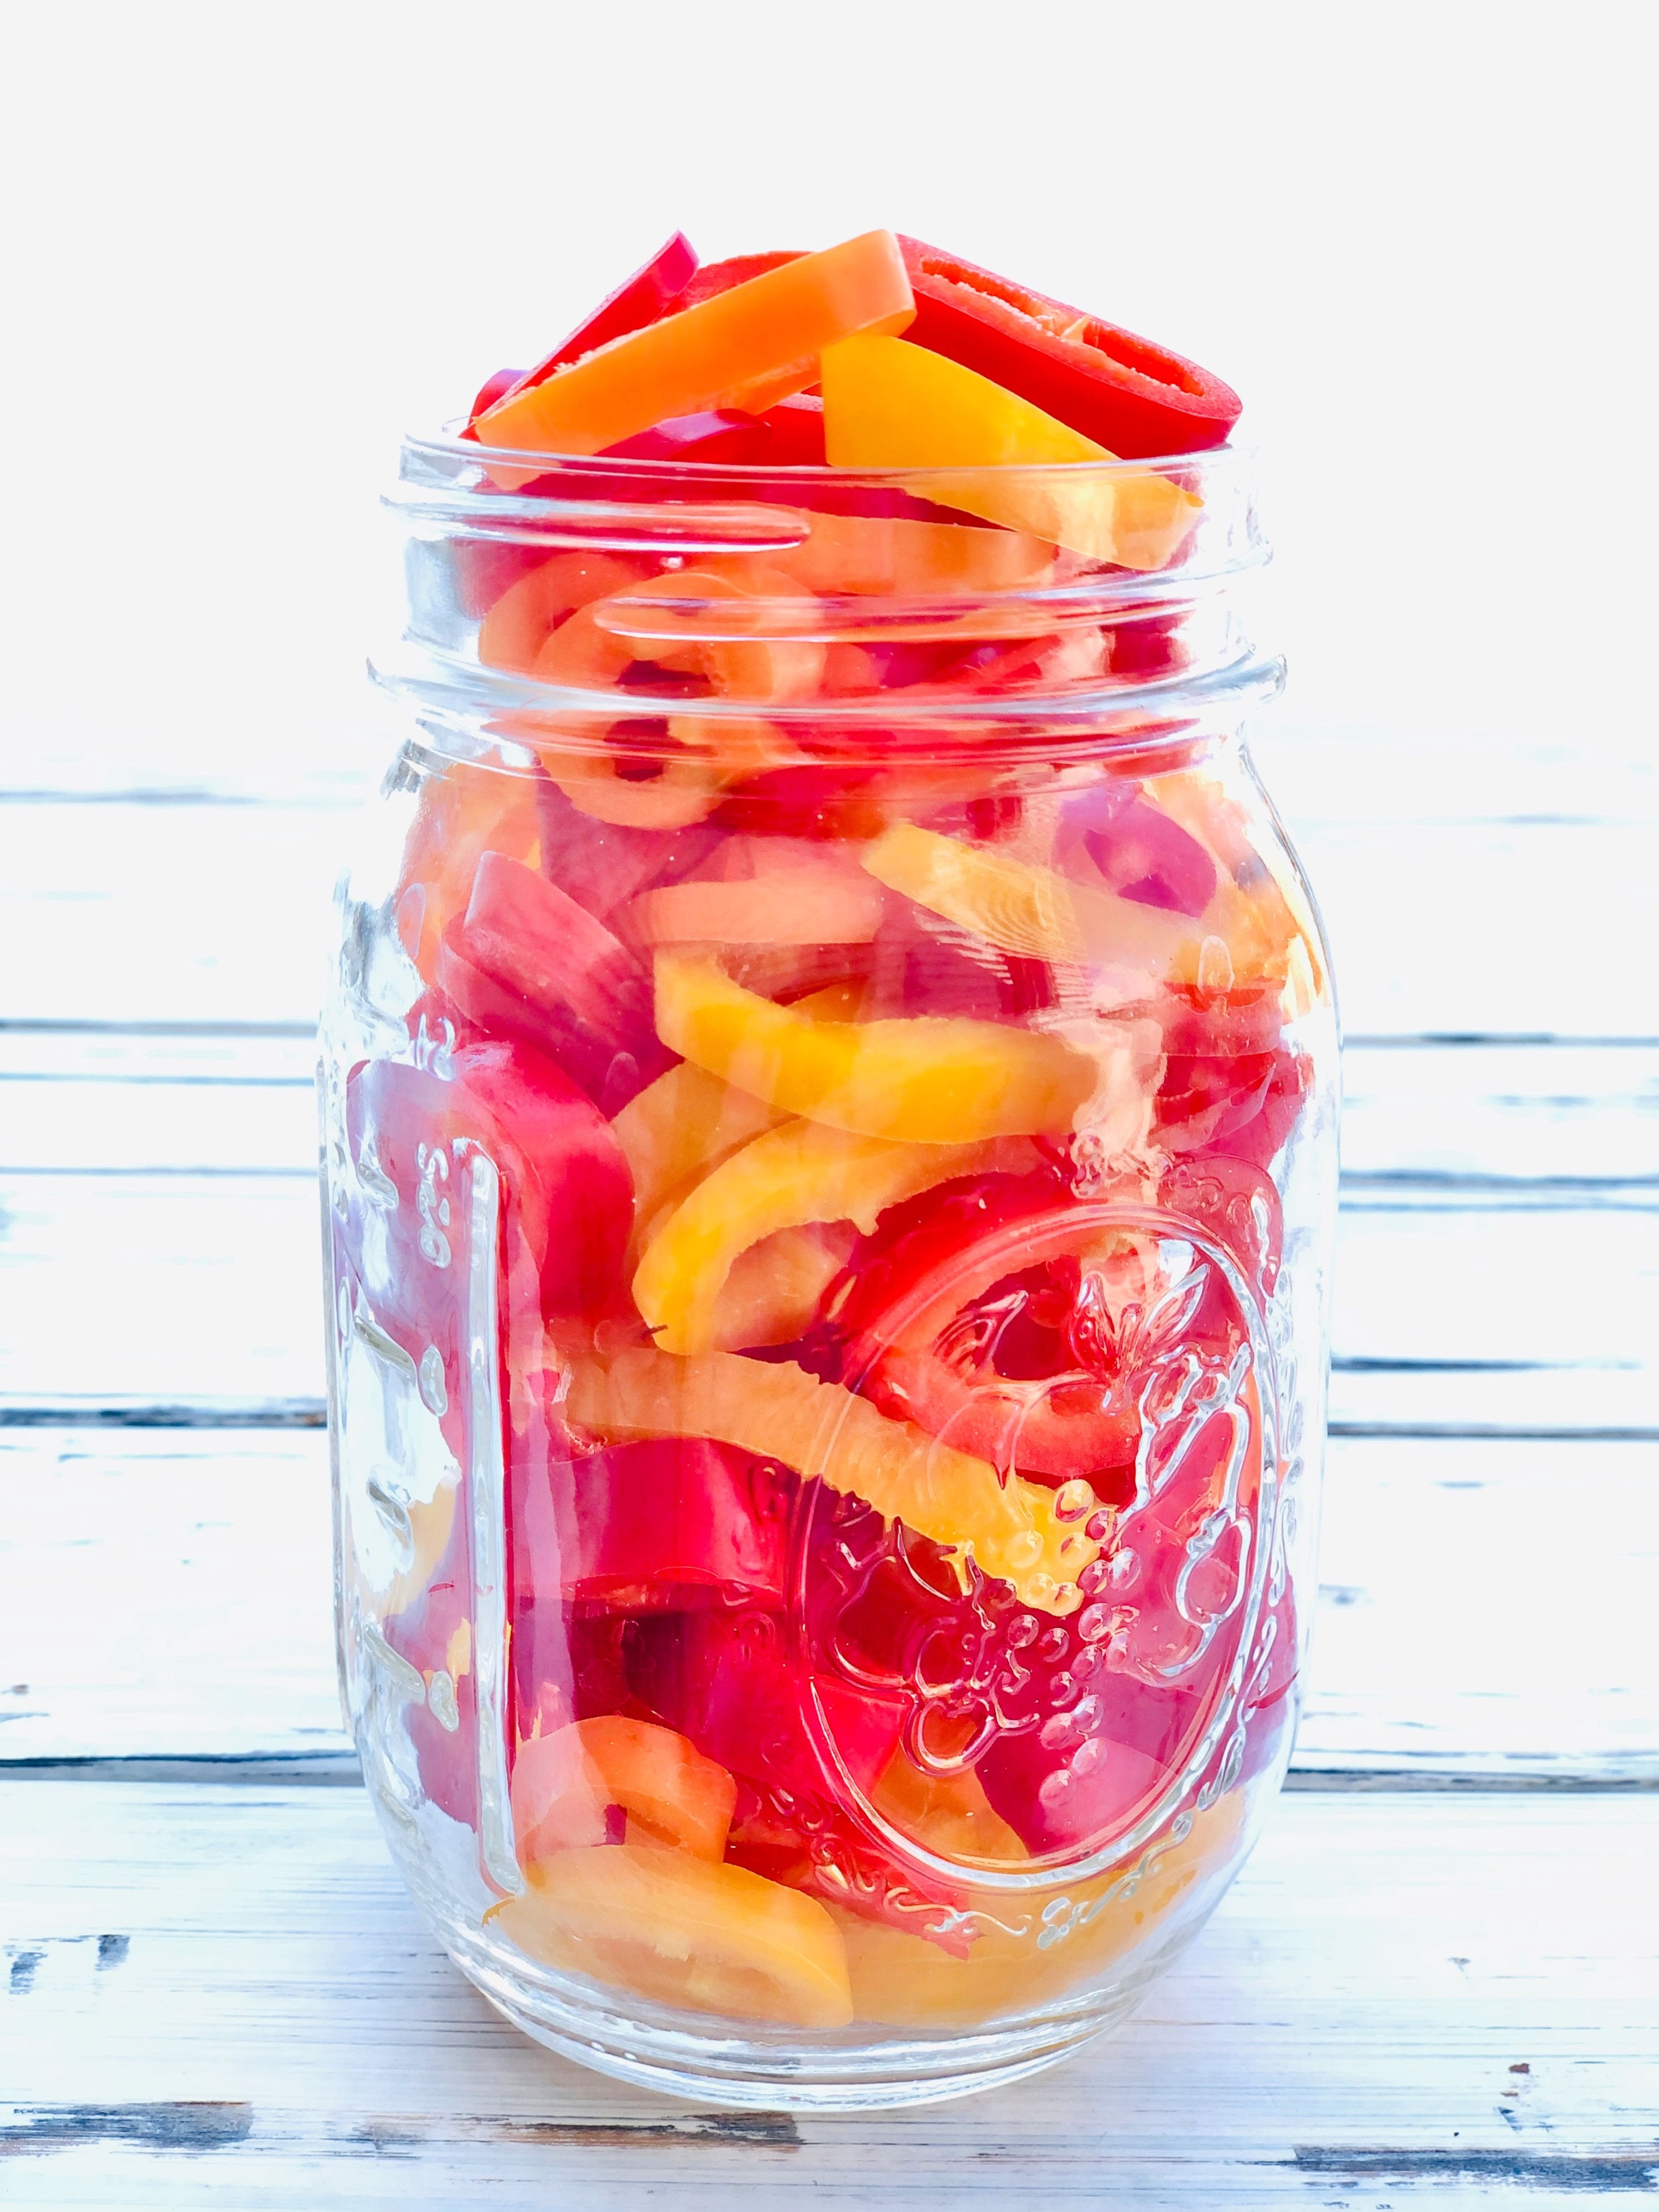 Sweet and Spicy Pickled Mini Peppers

A quick and easy recipe for pickling peppers!

#howtopicklepeppers #canningrecipes #pickledpeppers #whattodowithminipeppers #canningandpreserving #thiswifecooksrecipes via @thiswifecooks